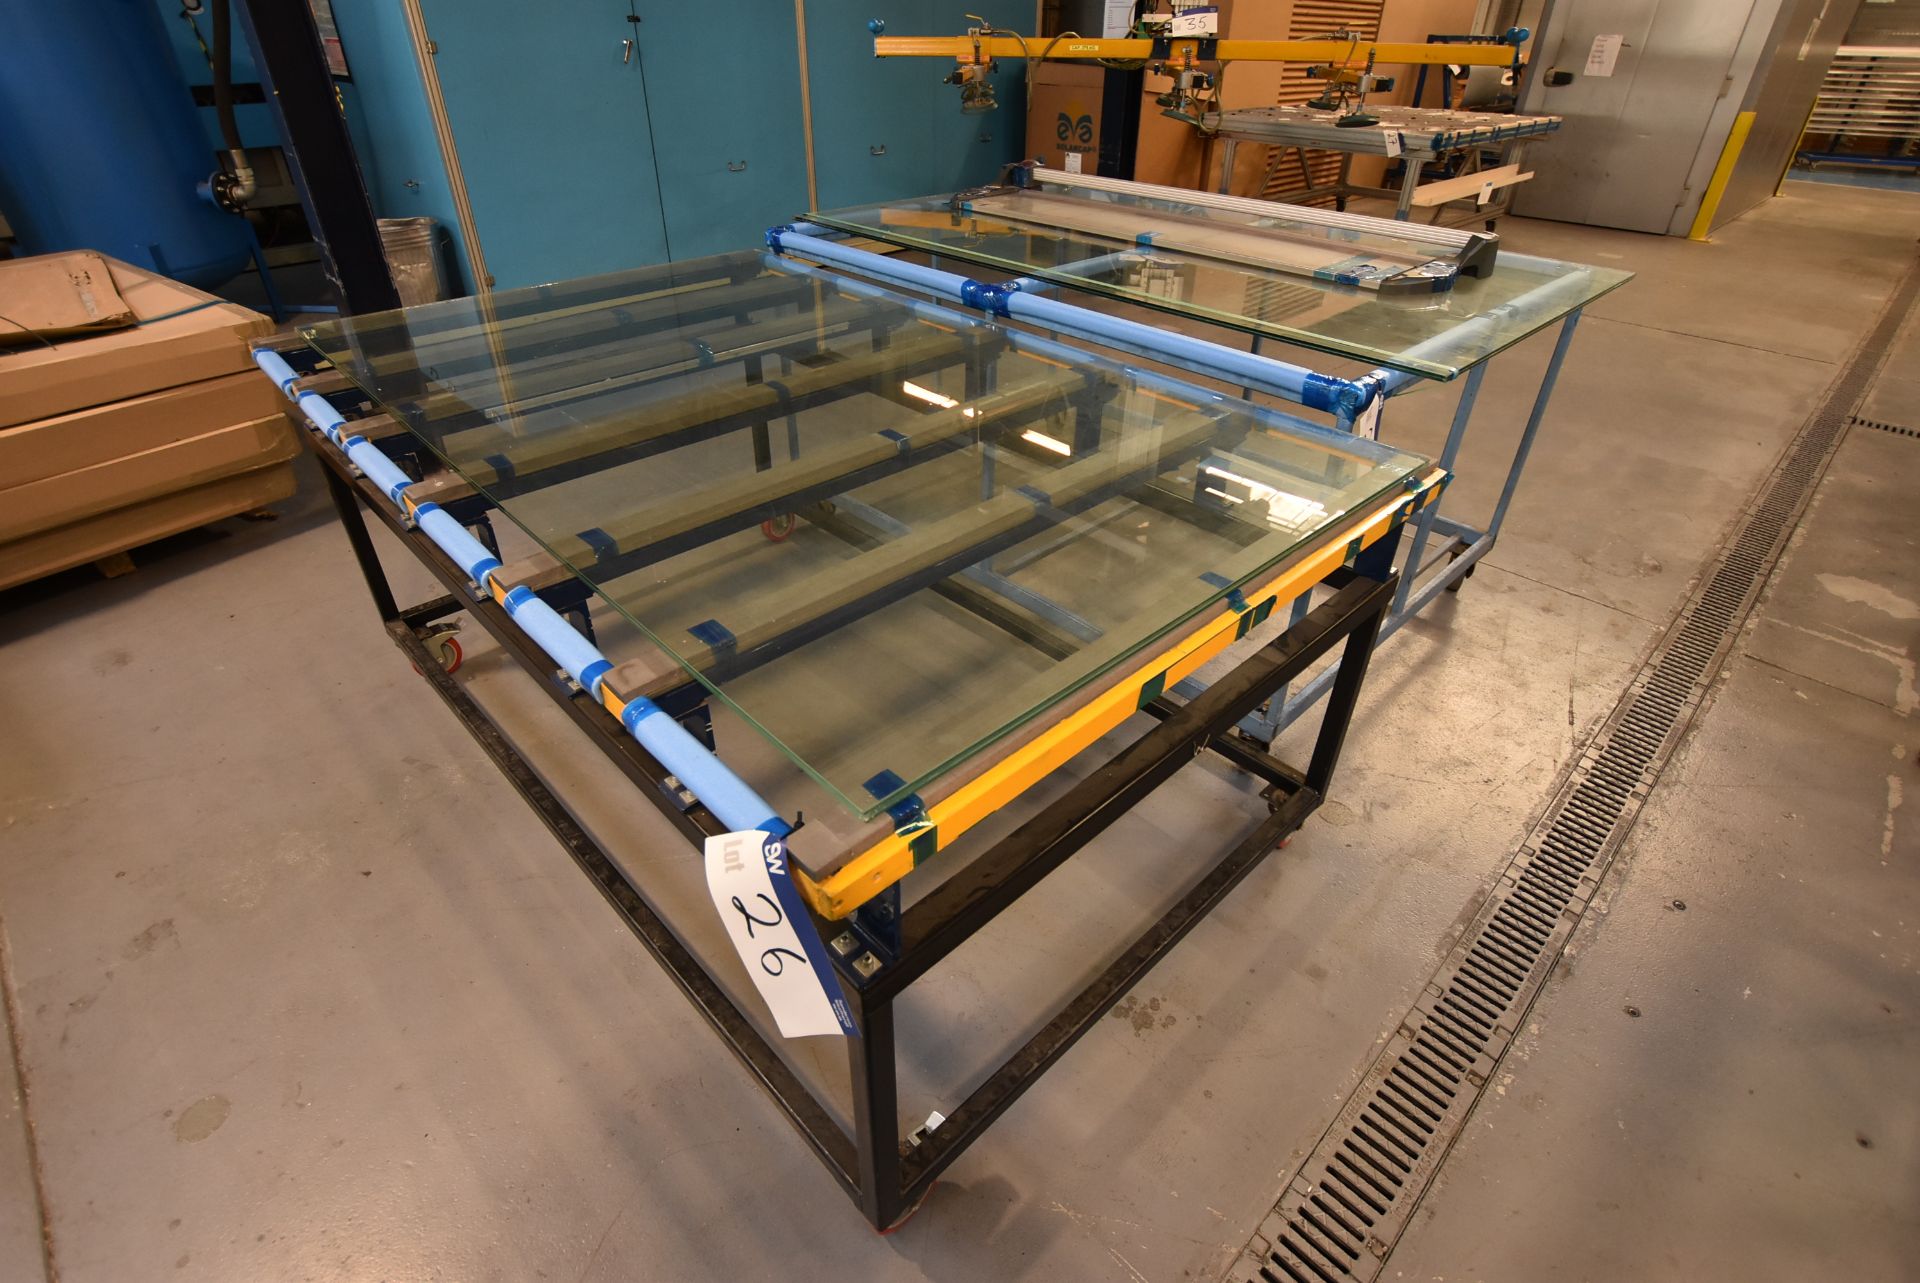 Two Mobile Benches, one 2m x 1.28m x 920mm high and one 1.8m x 1.3m x 980mm high